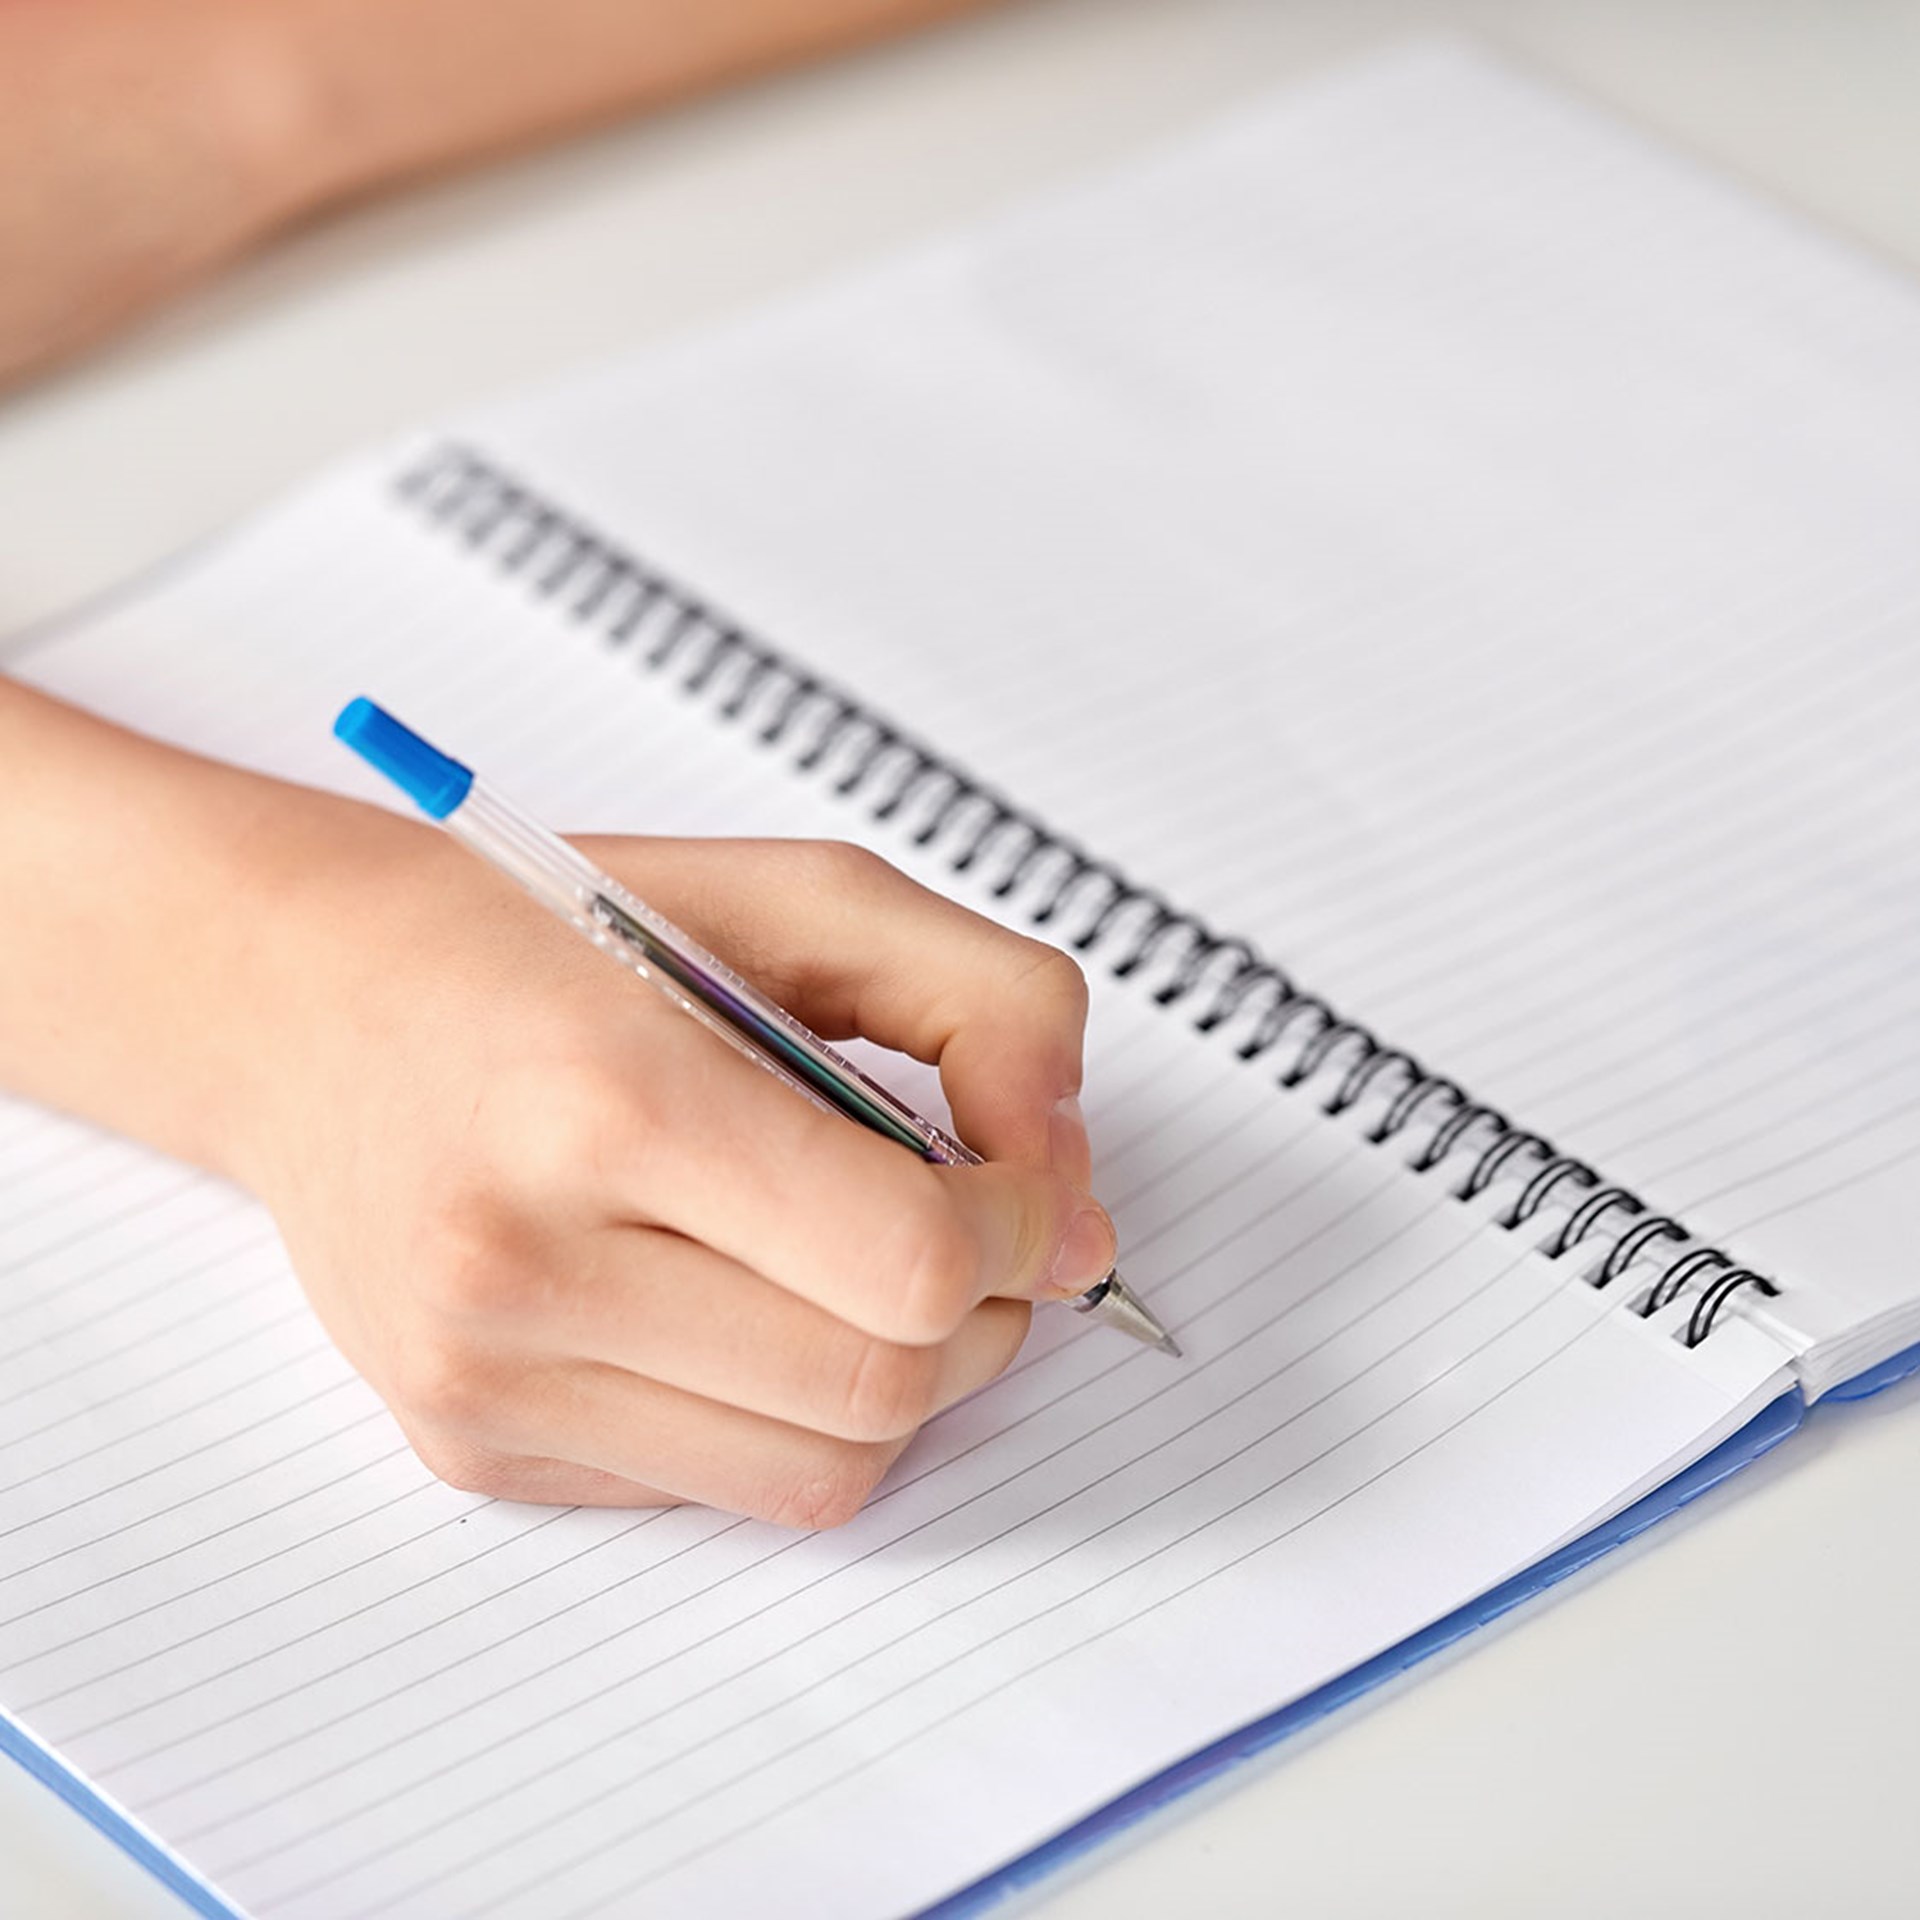 36468808 Hands Of Student Girl With Pen Writing To Notebook